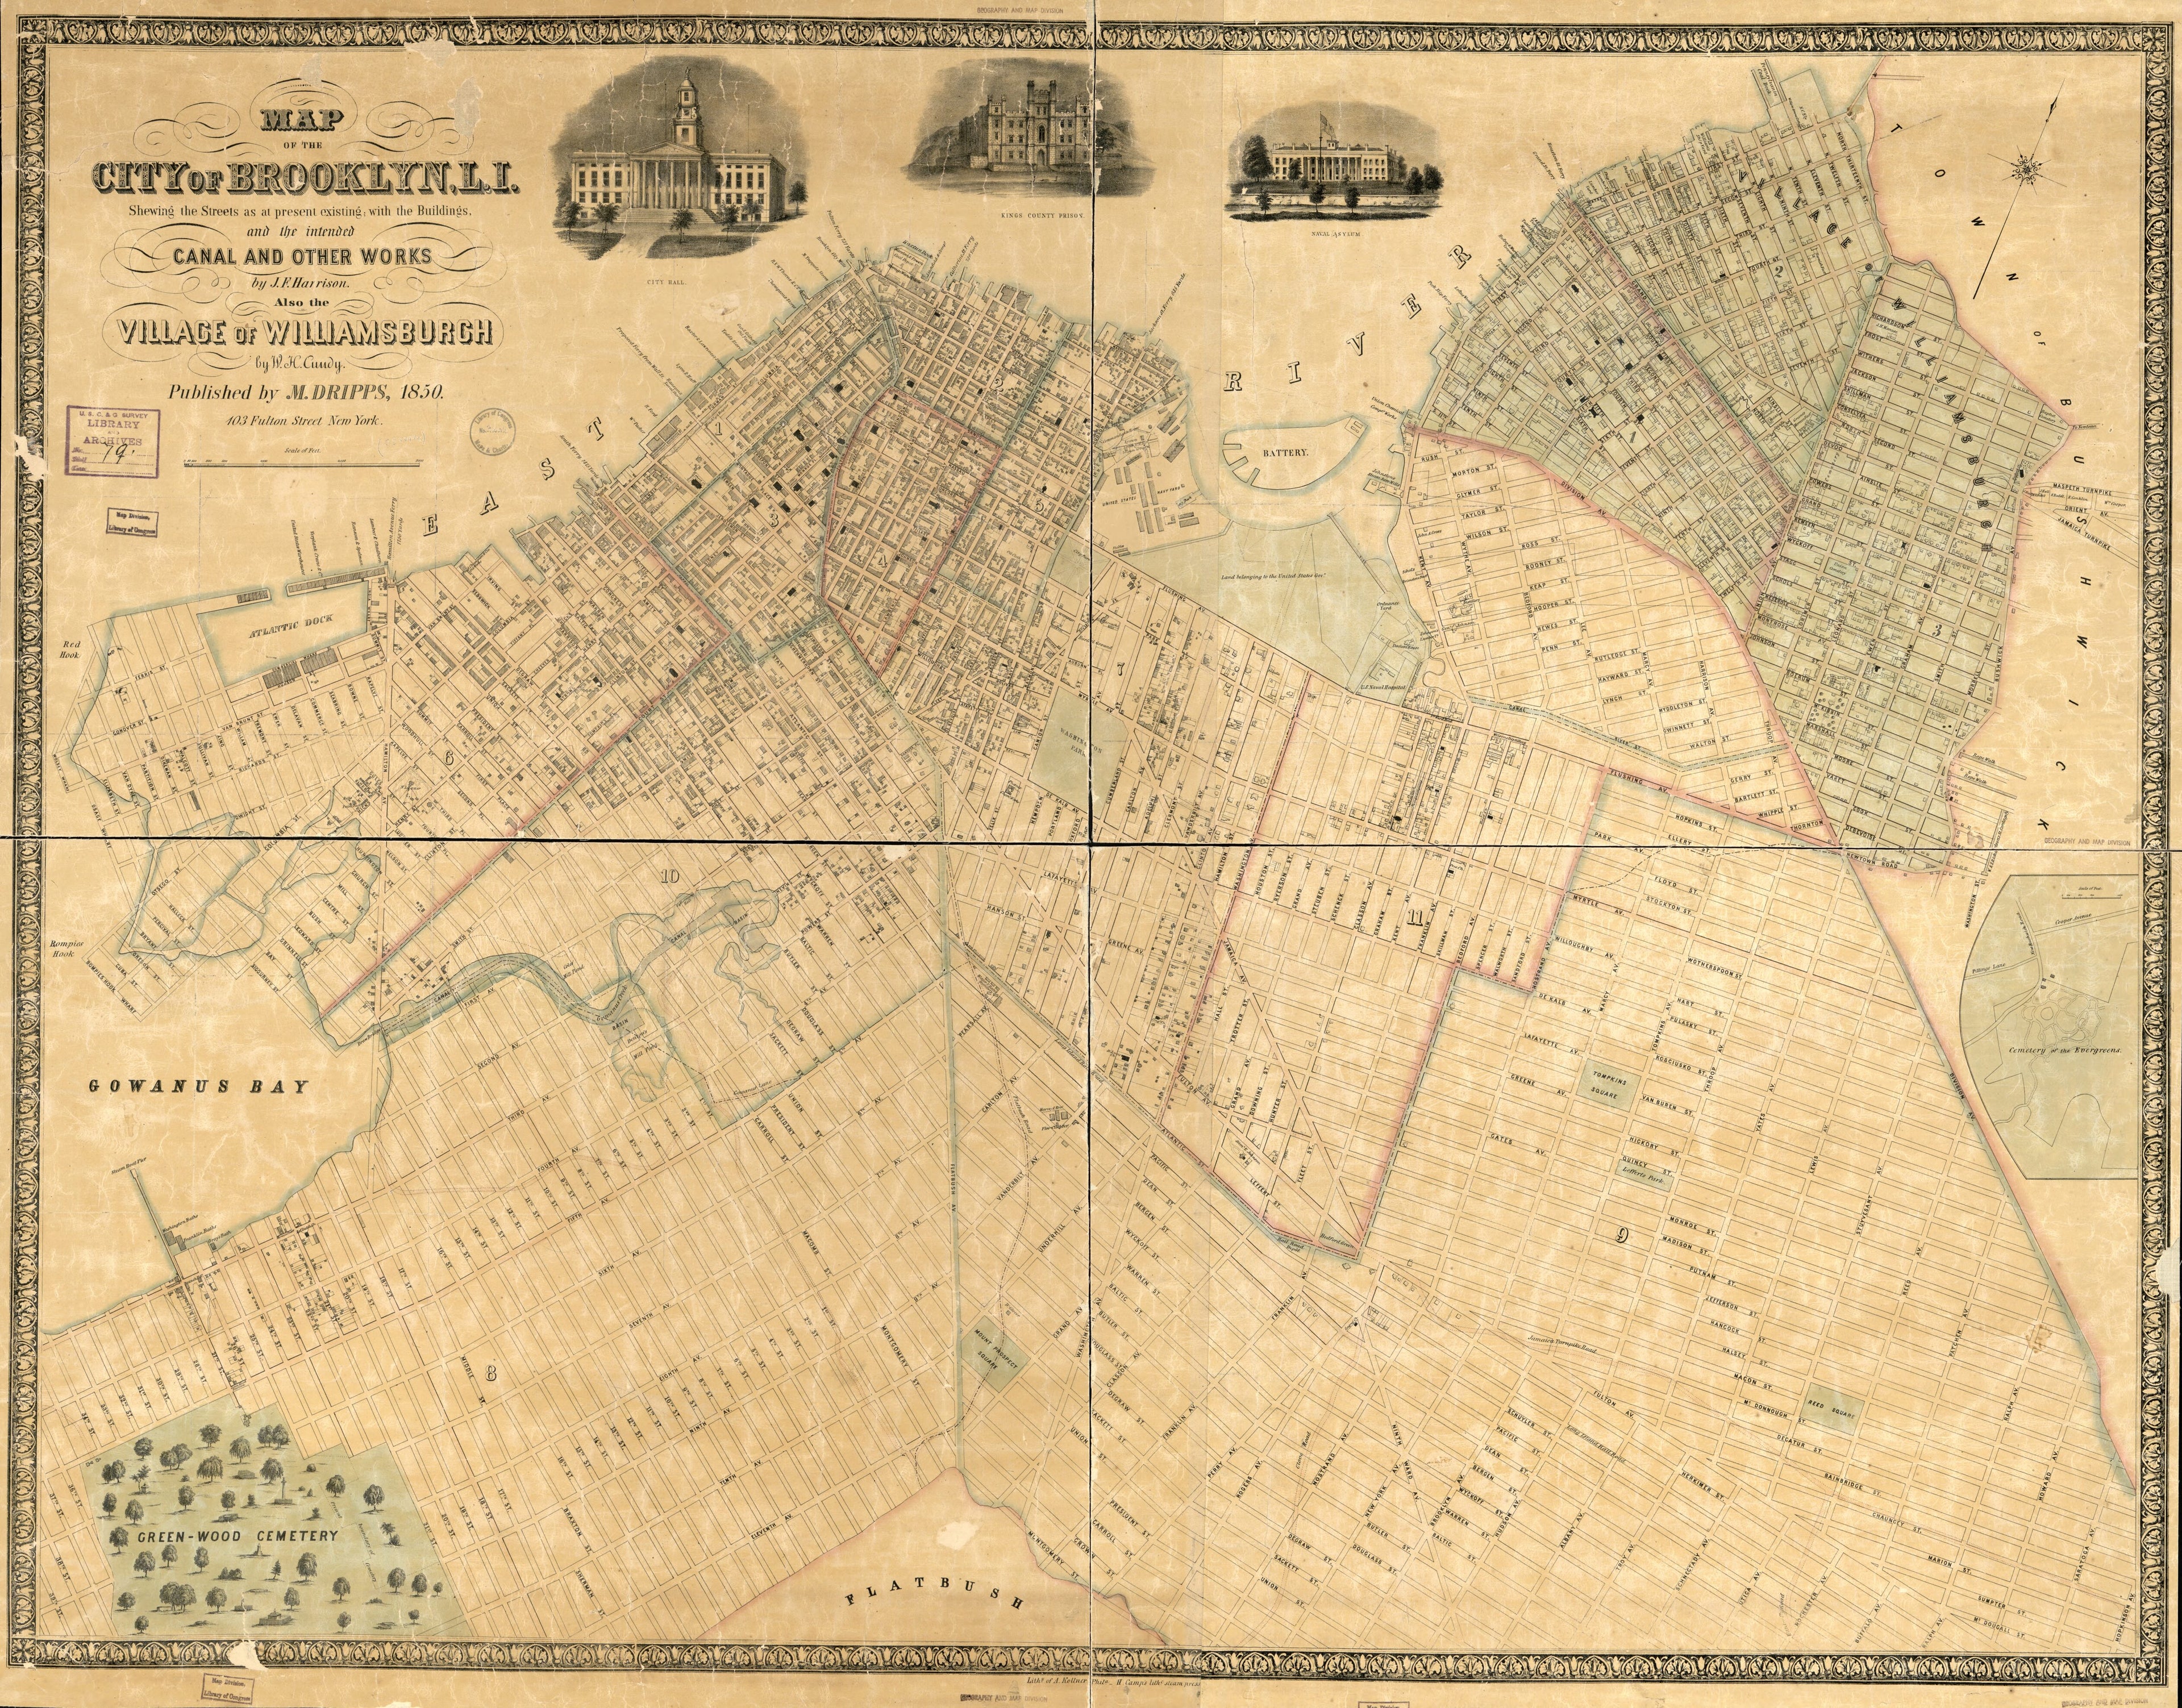 This old map of Map of the City of Brooklyn, L.I. : Shewing the Streets As at Present Existing With the Buildings and the Intended Canal and Other Works : Also the Village of Williamsburgh from 1850 was created by W. H. Cundy, M. (Matthew) Dripps, John F